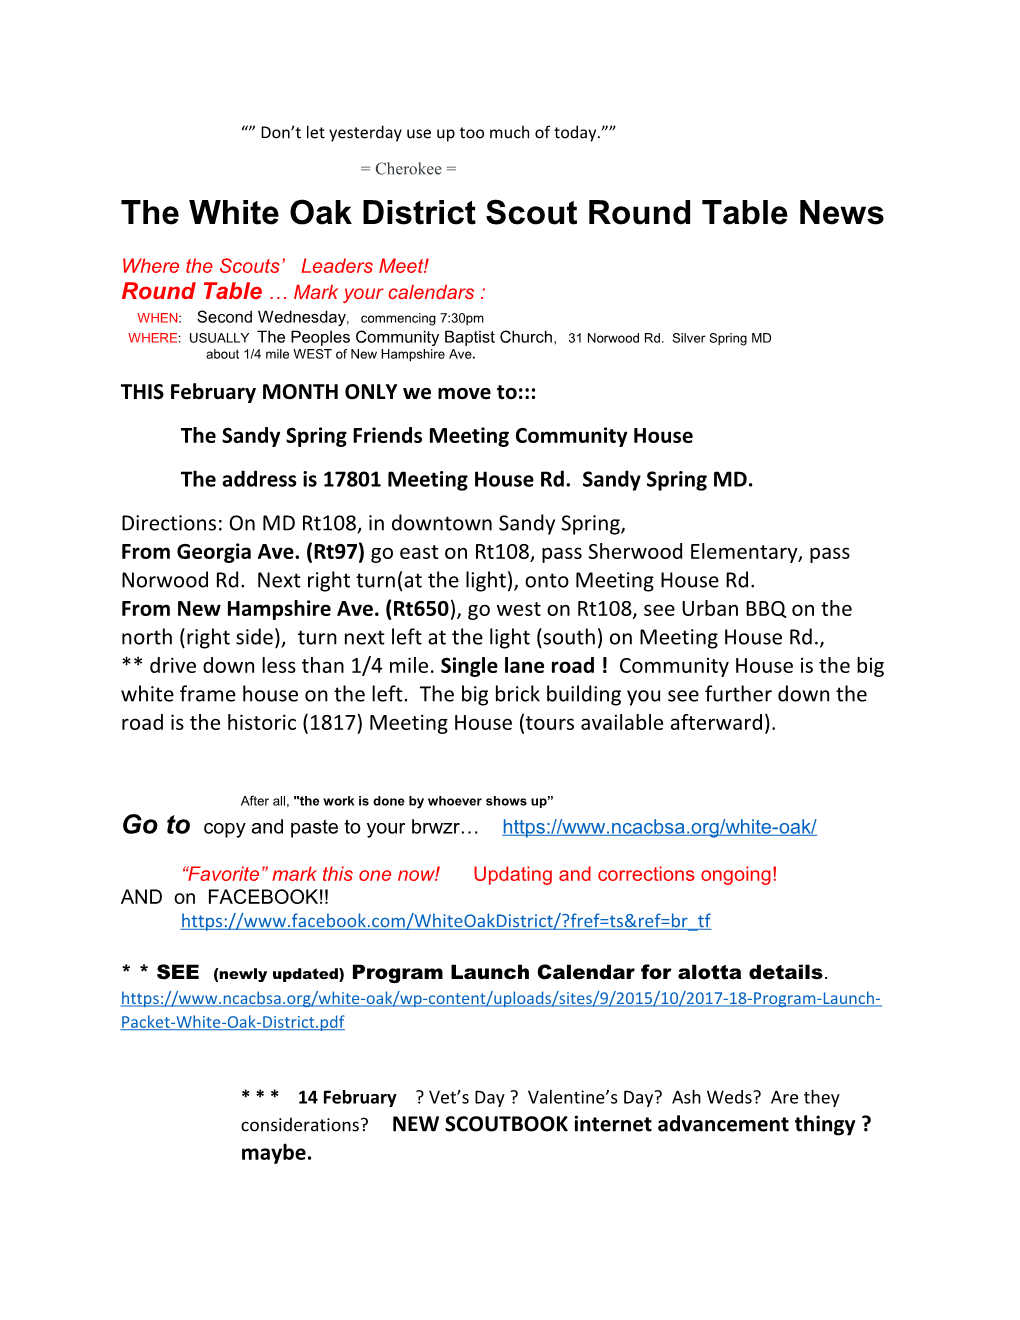 The White Oak District Scout Round Table News